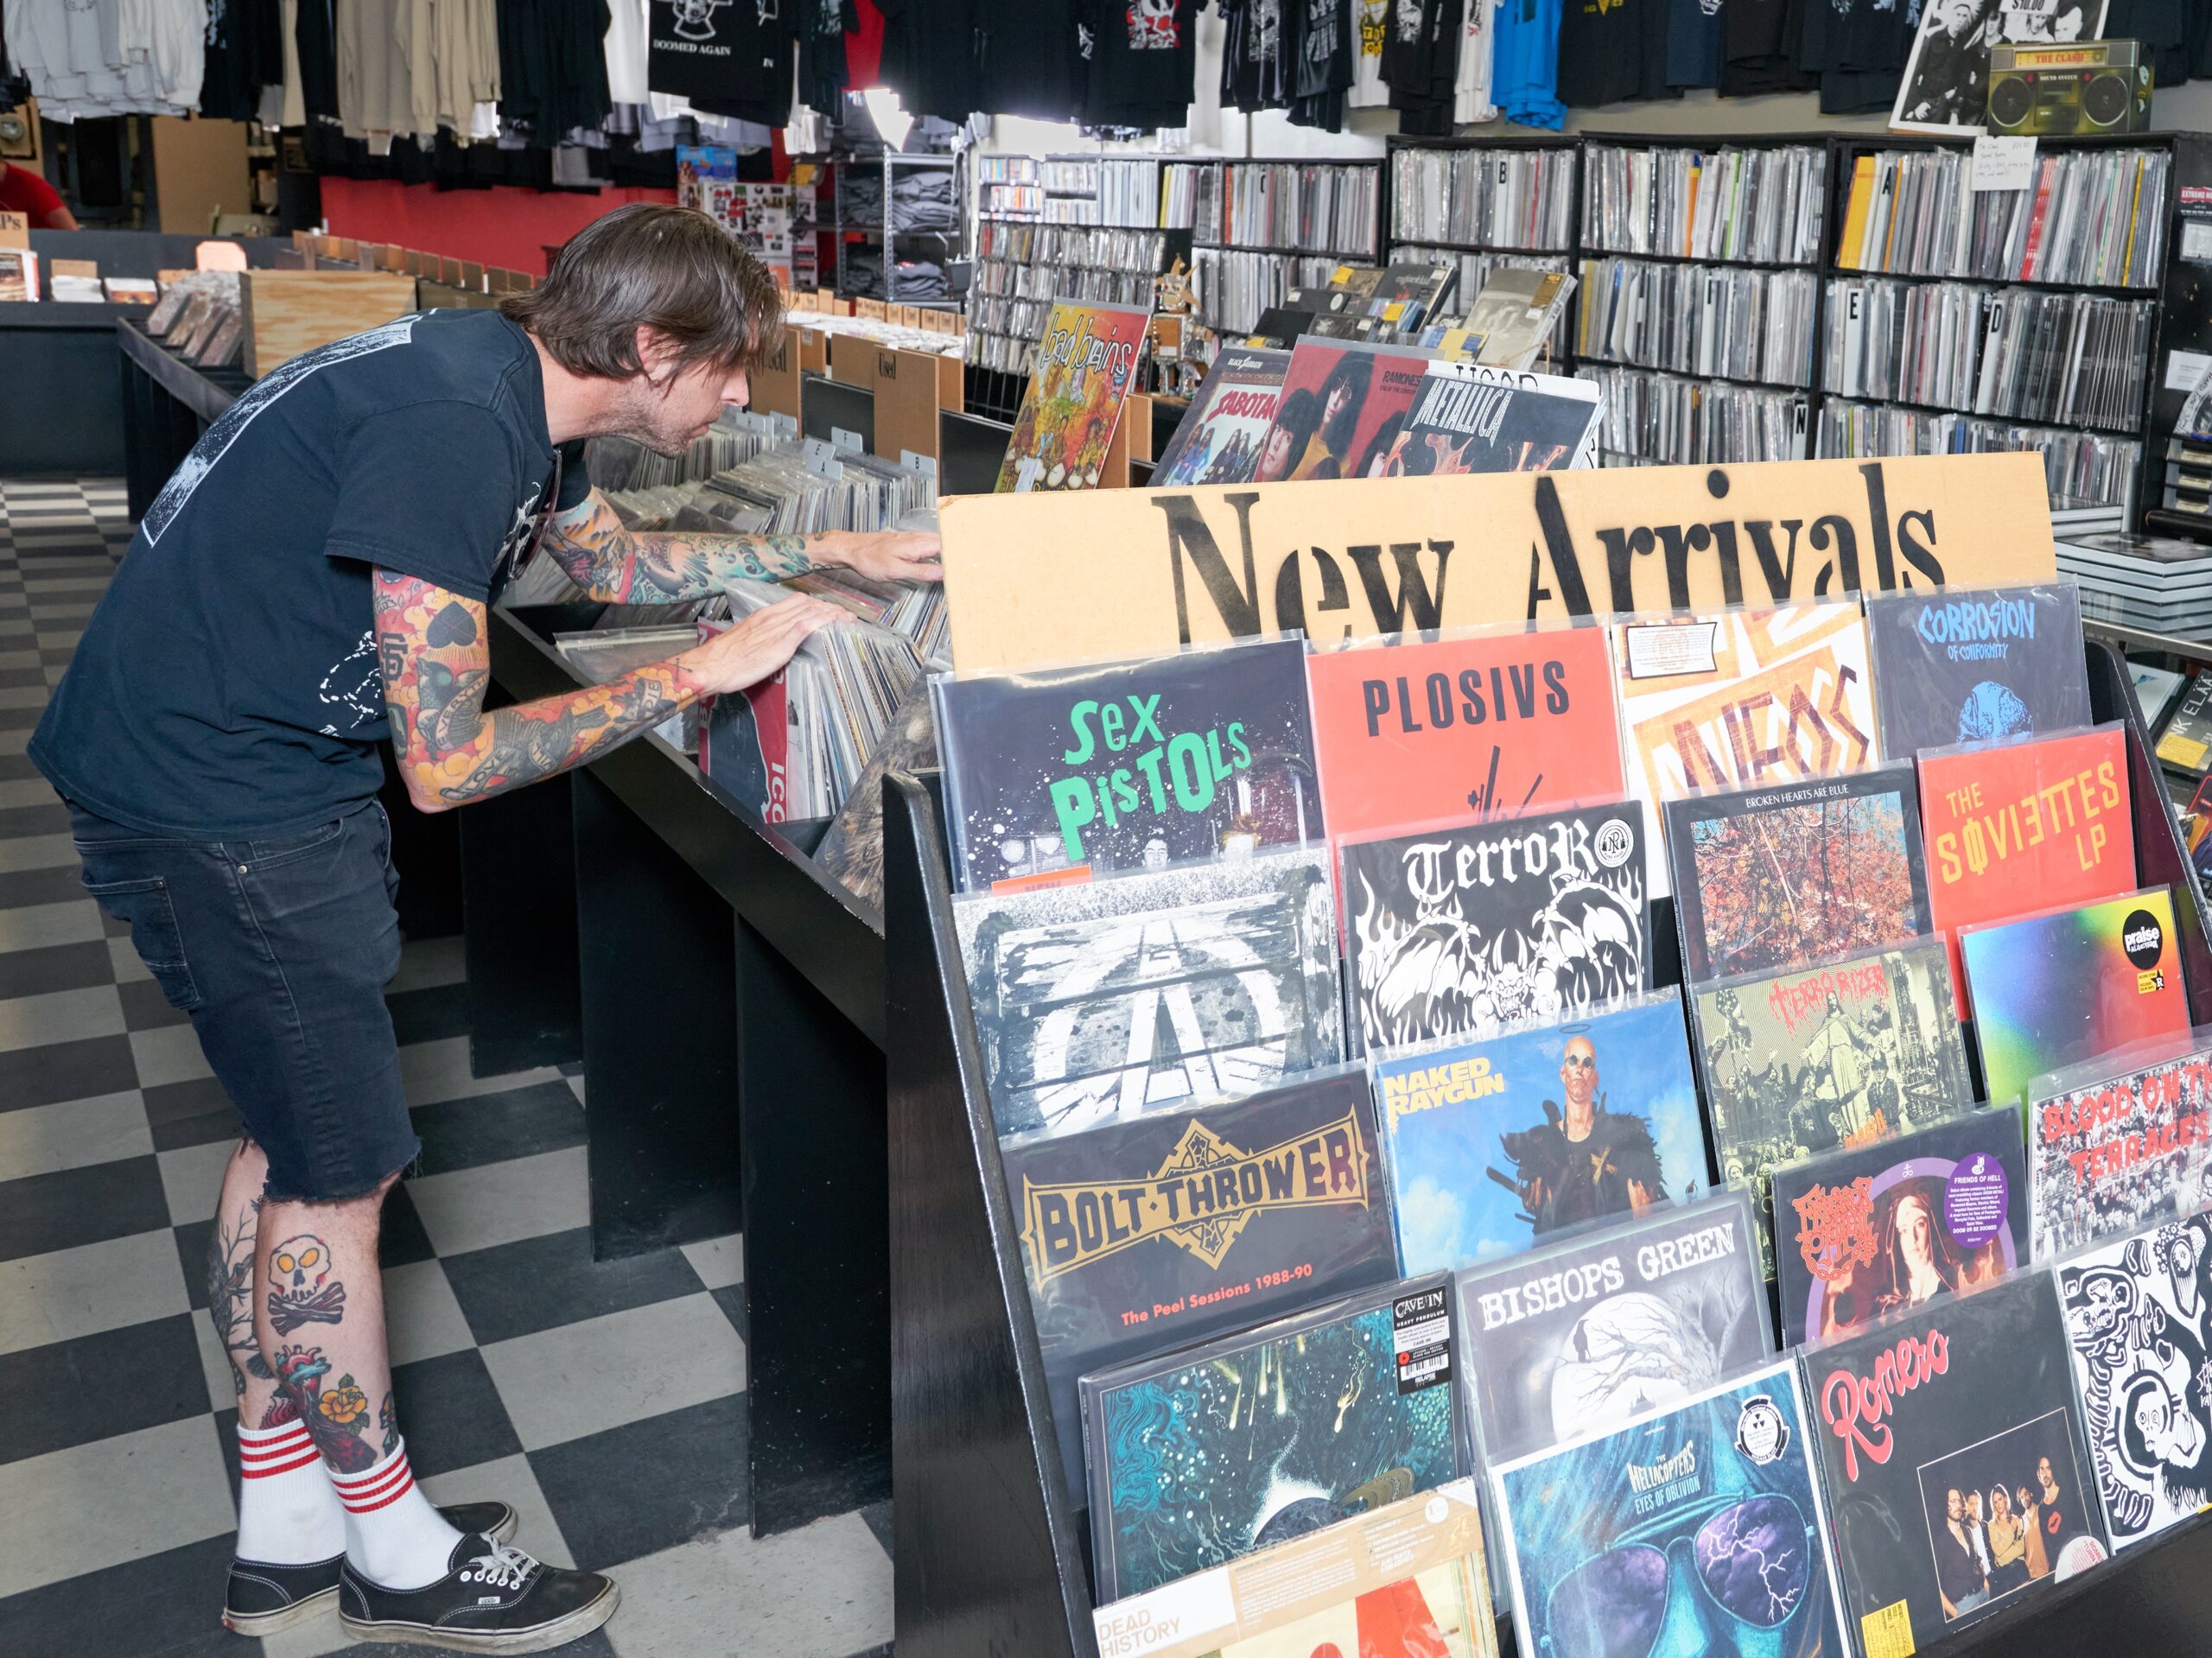 Person leans over to look through a table full of records, with a display reading "New Arrivals" in foreground.